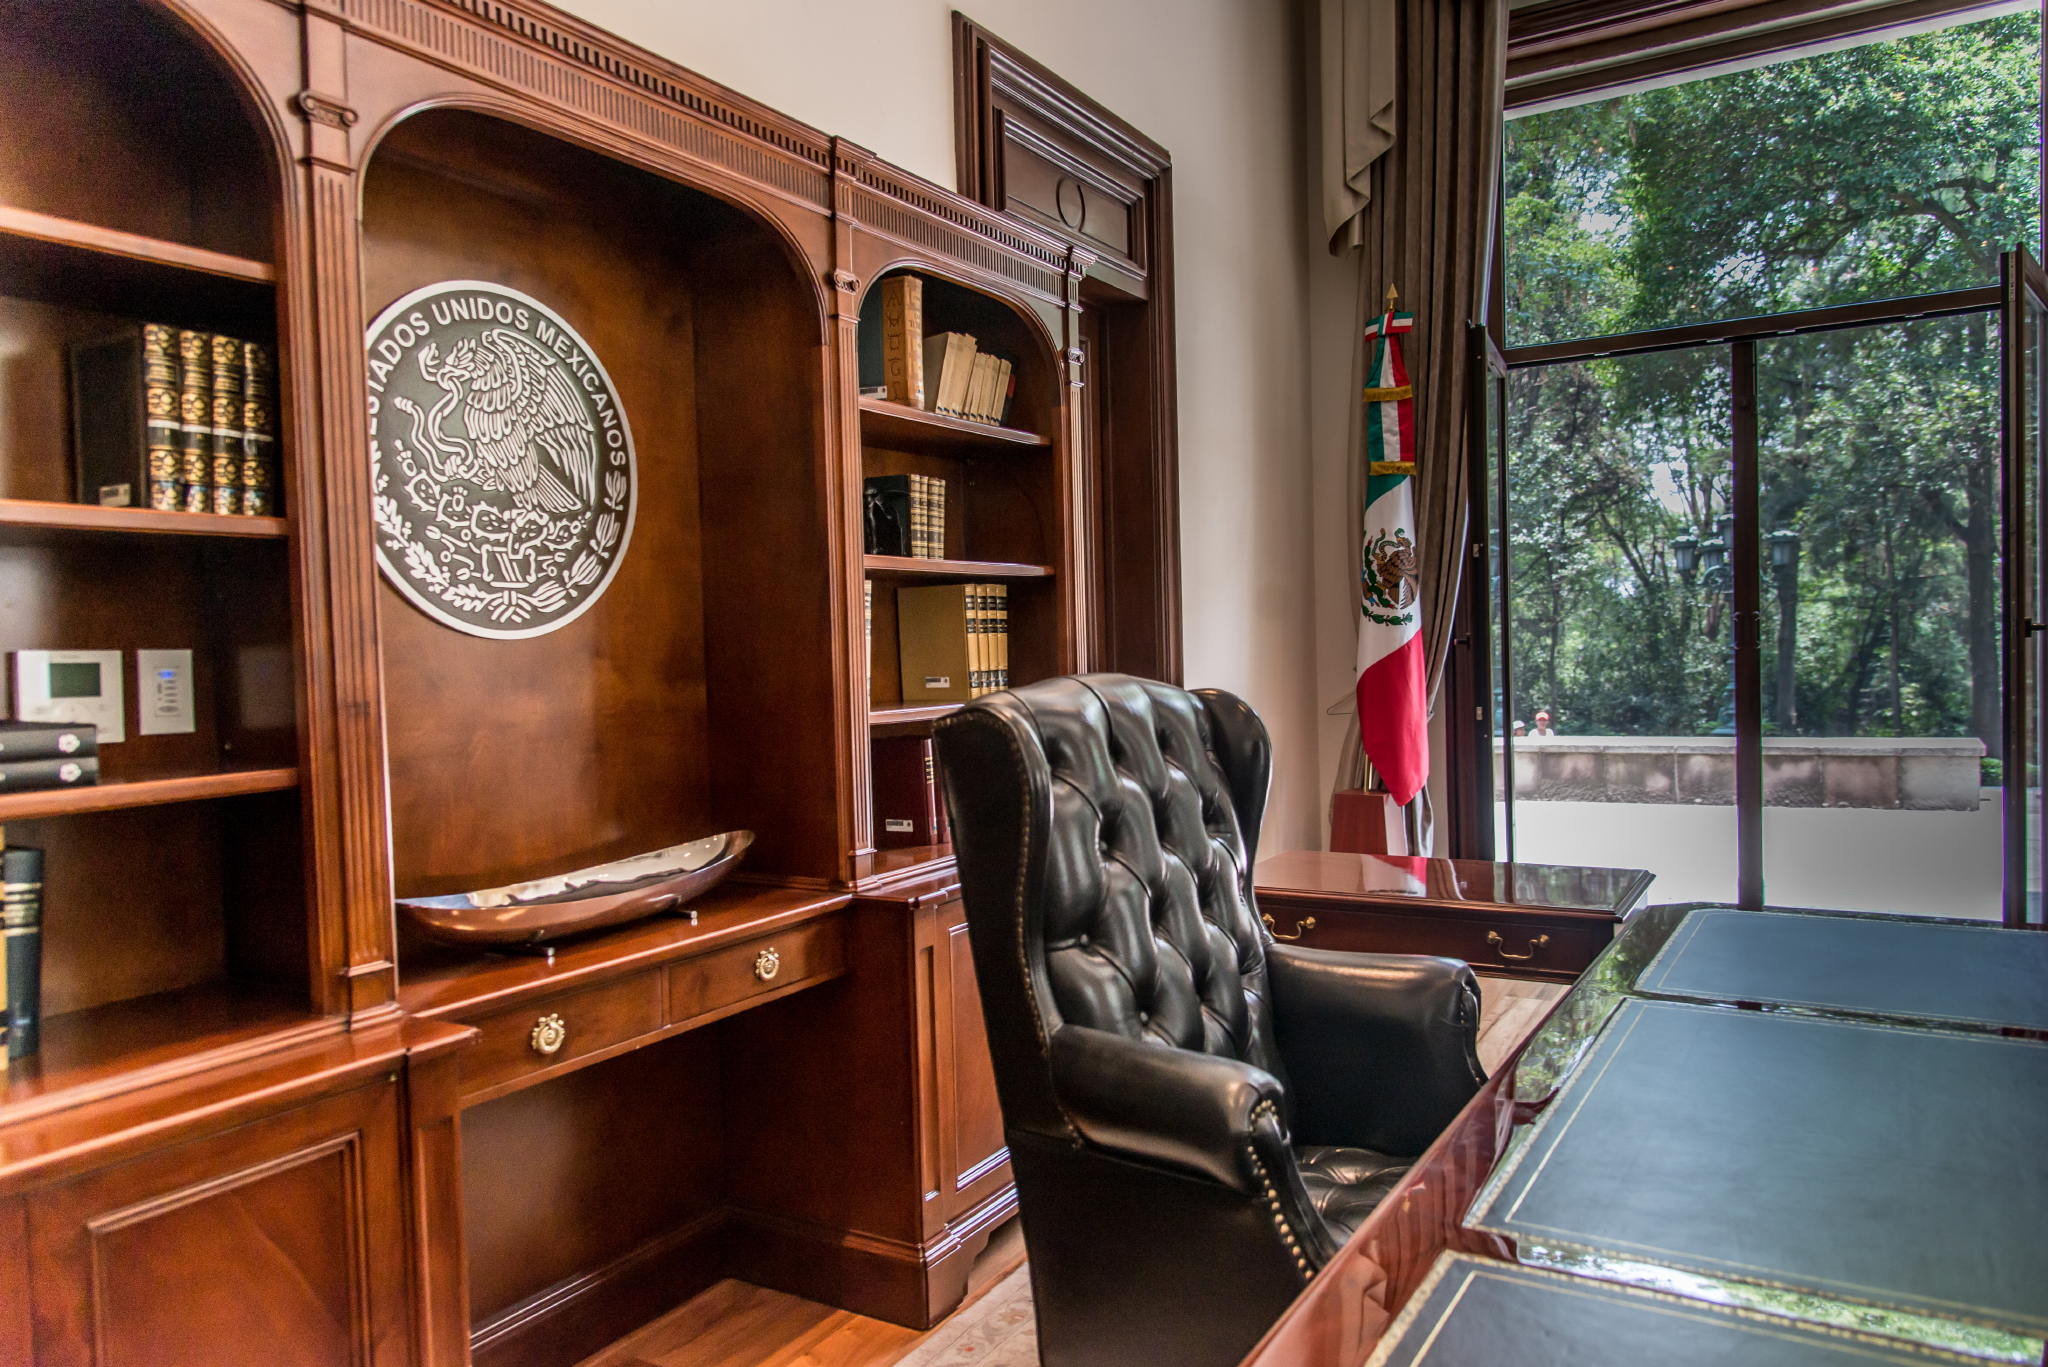 Presidential Seat at Los Pinos Museum | GlobeQuest Blog